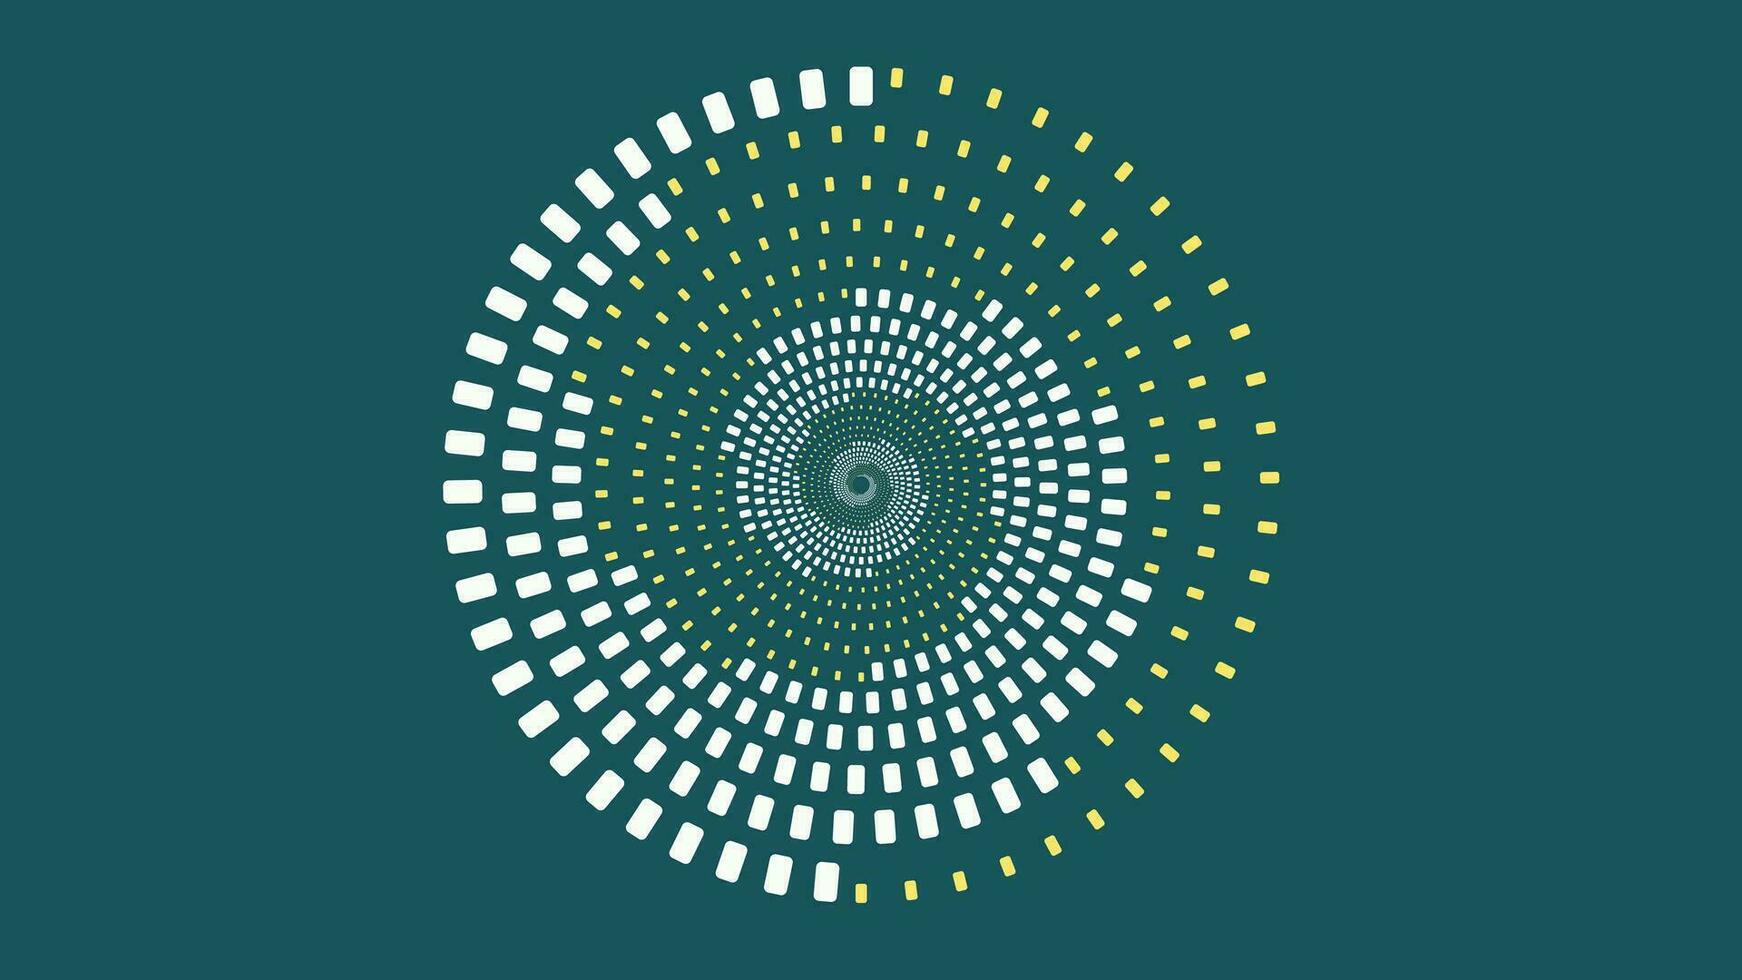 Abstract spiral vortex spinning background in simple style. This creative design can be used as a banner or website home page. vector